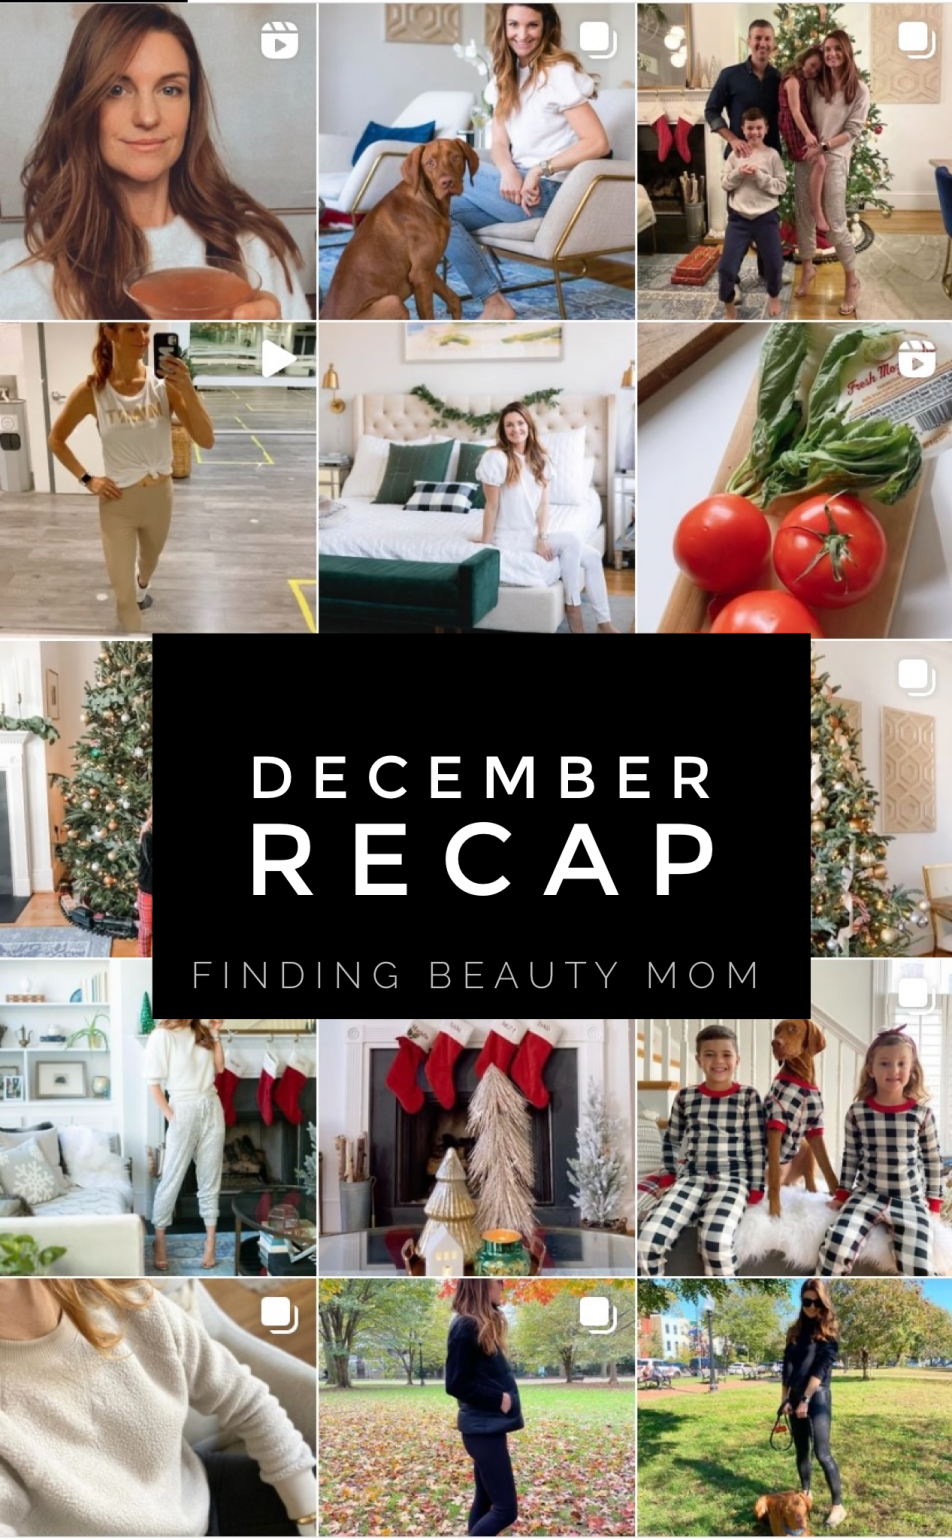 December recap, December outfits, the December edit from finding beauty mom, December style, gift guides